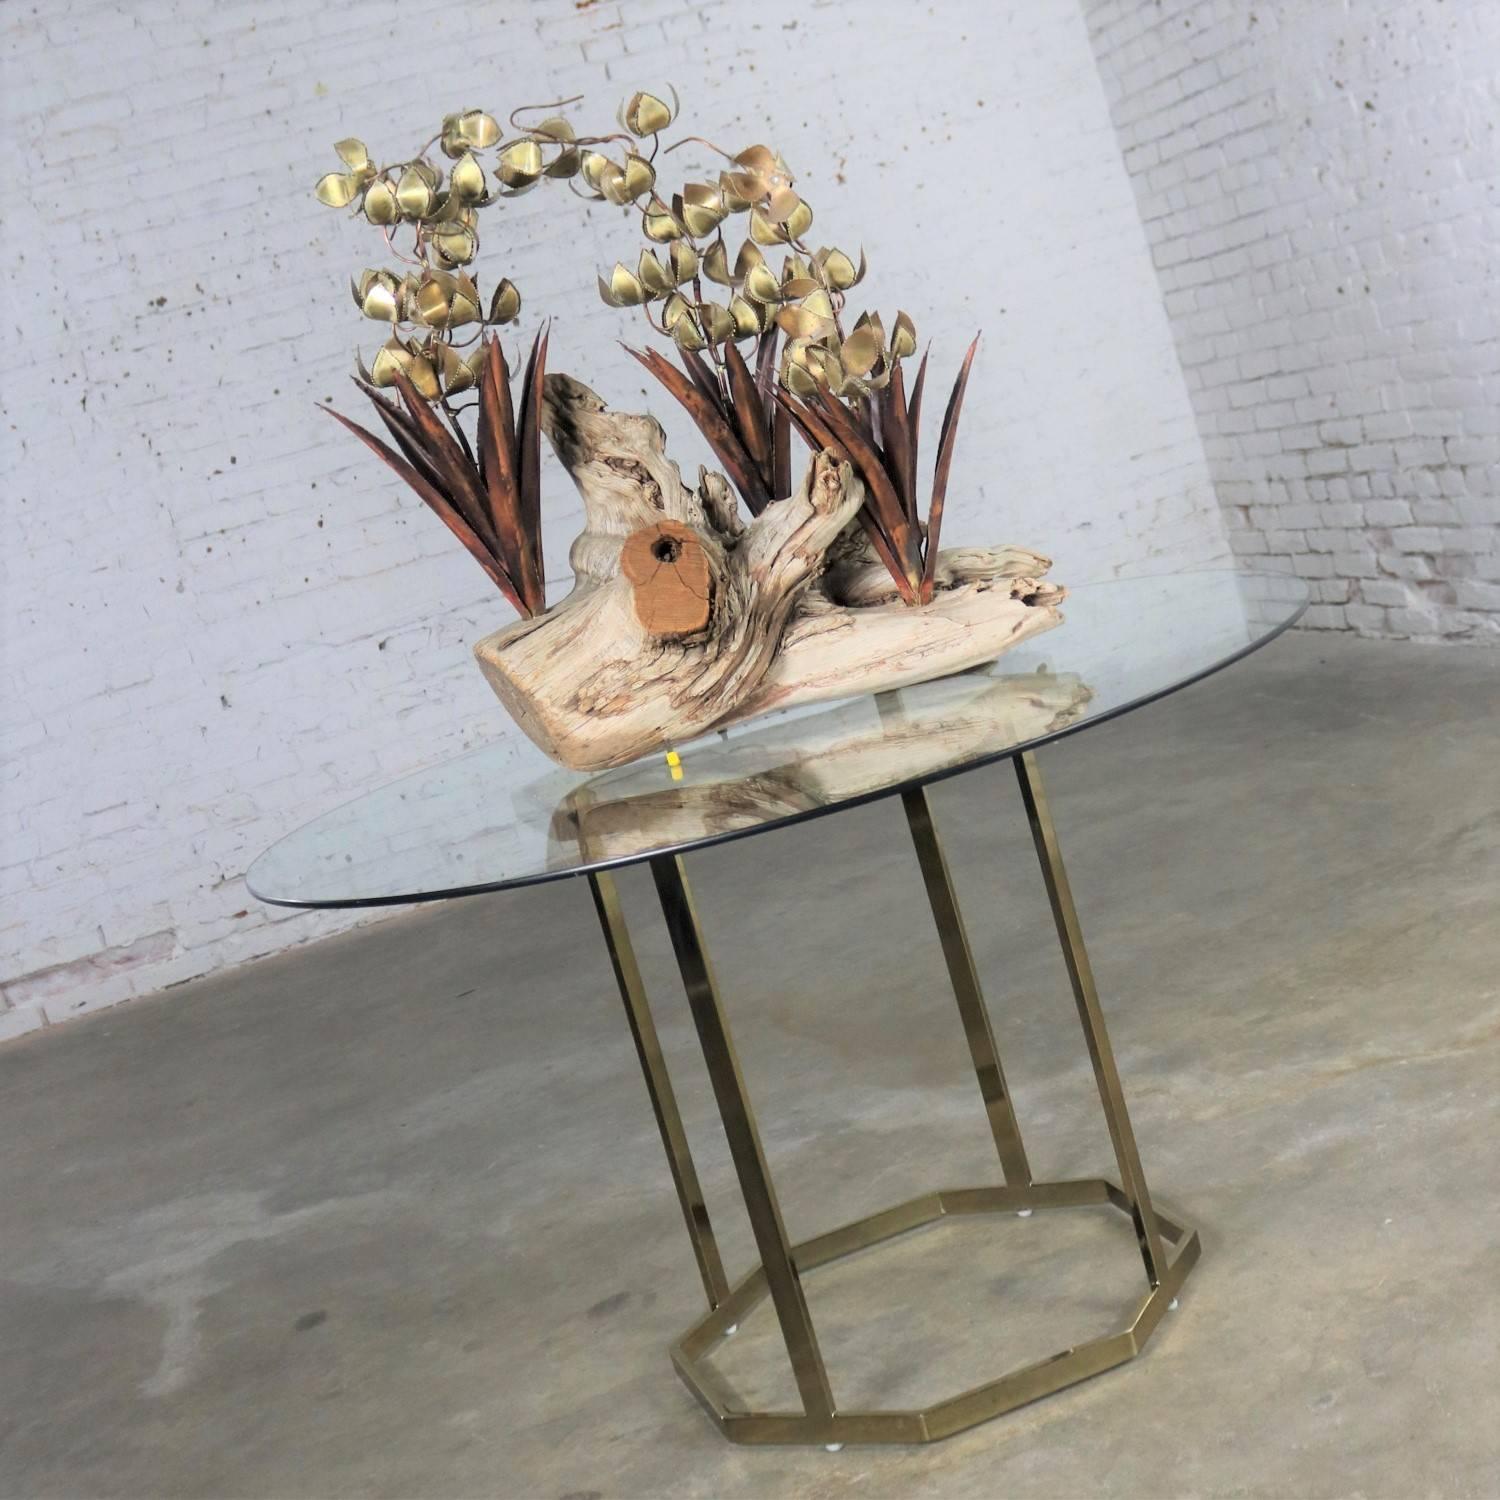 Torch Cut Brutalist Floral Copper and Brass Sculpture on Driftwood 13